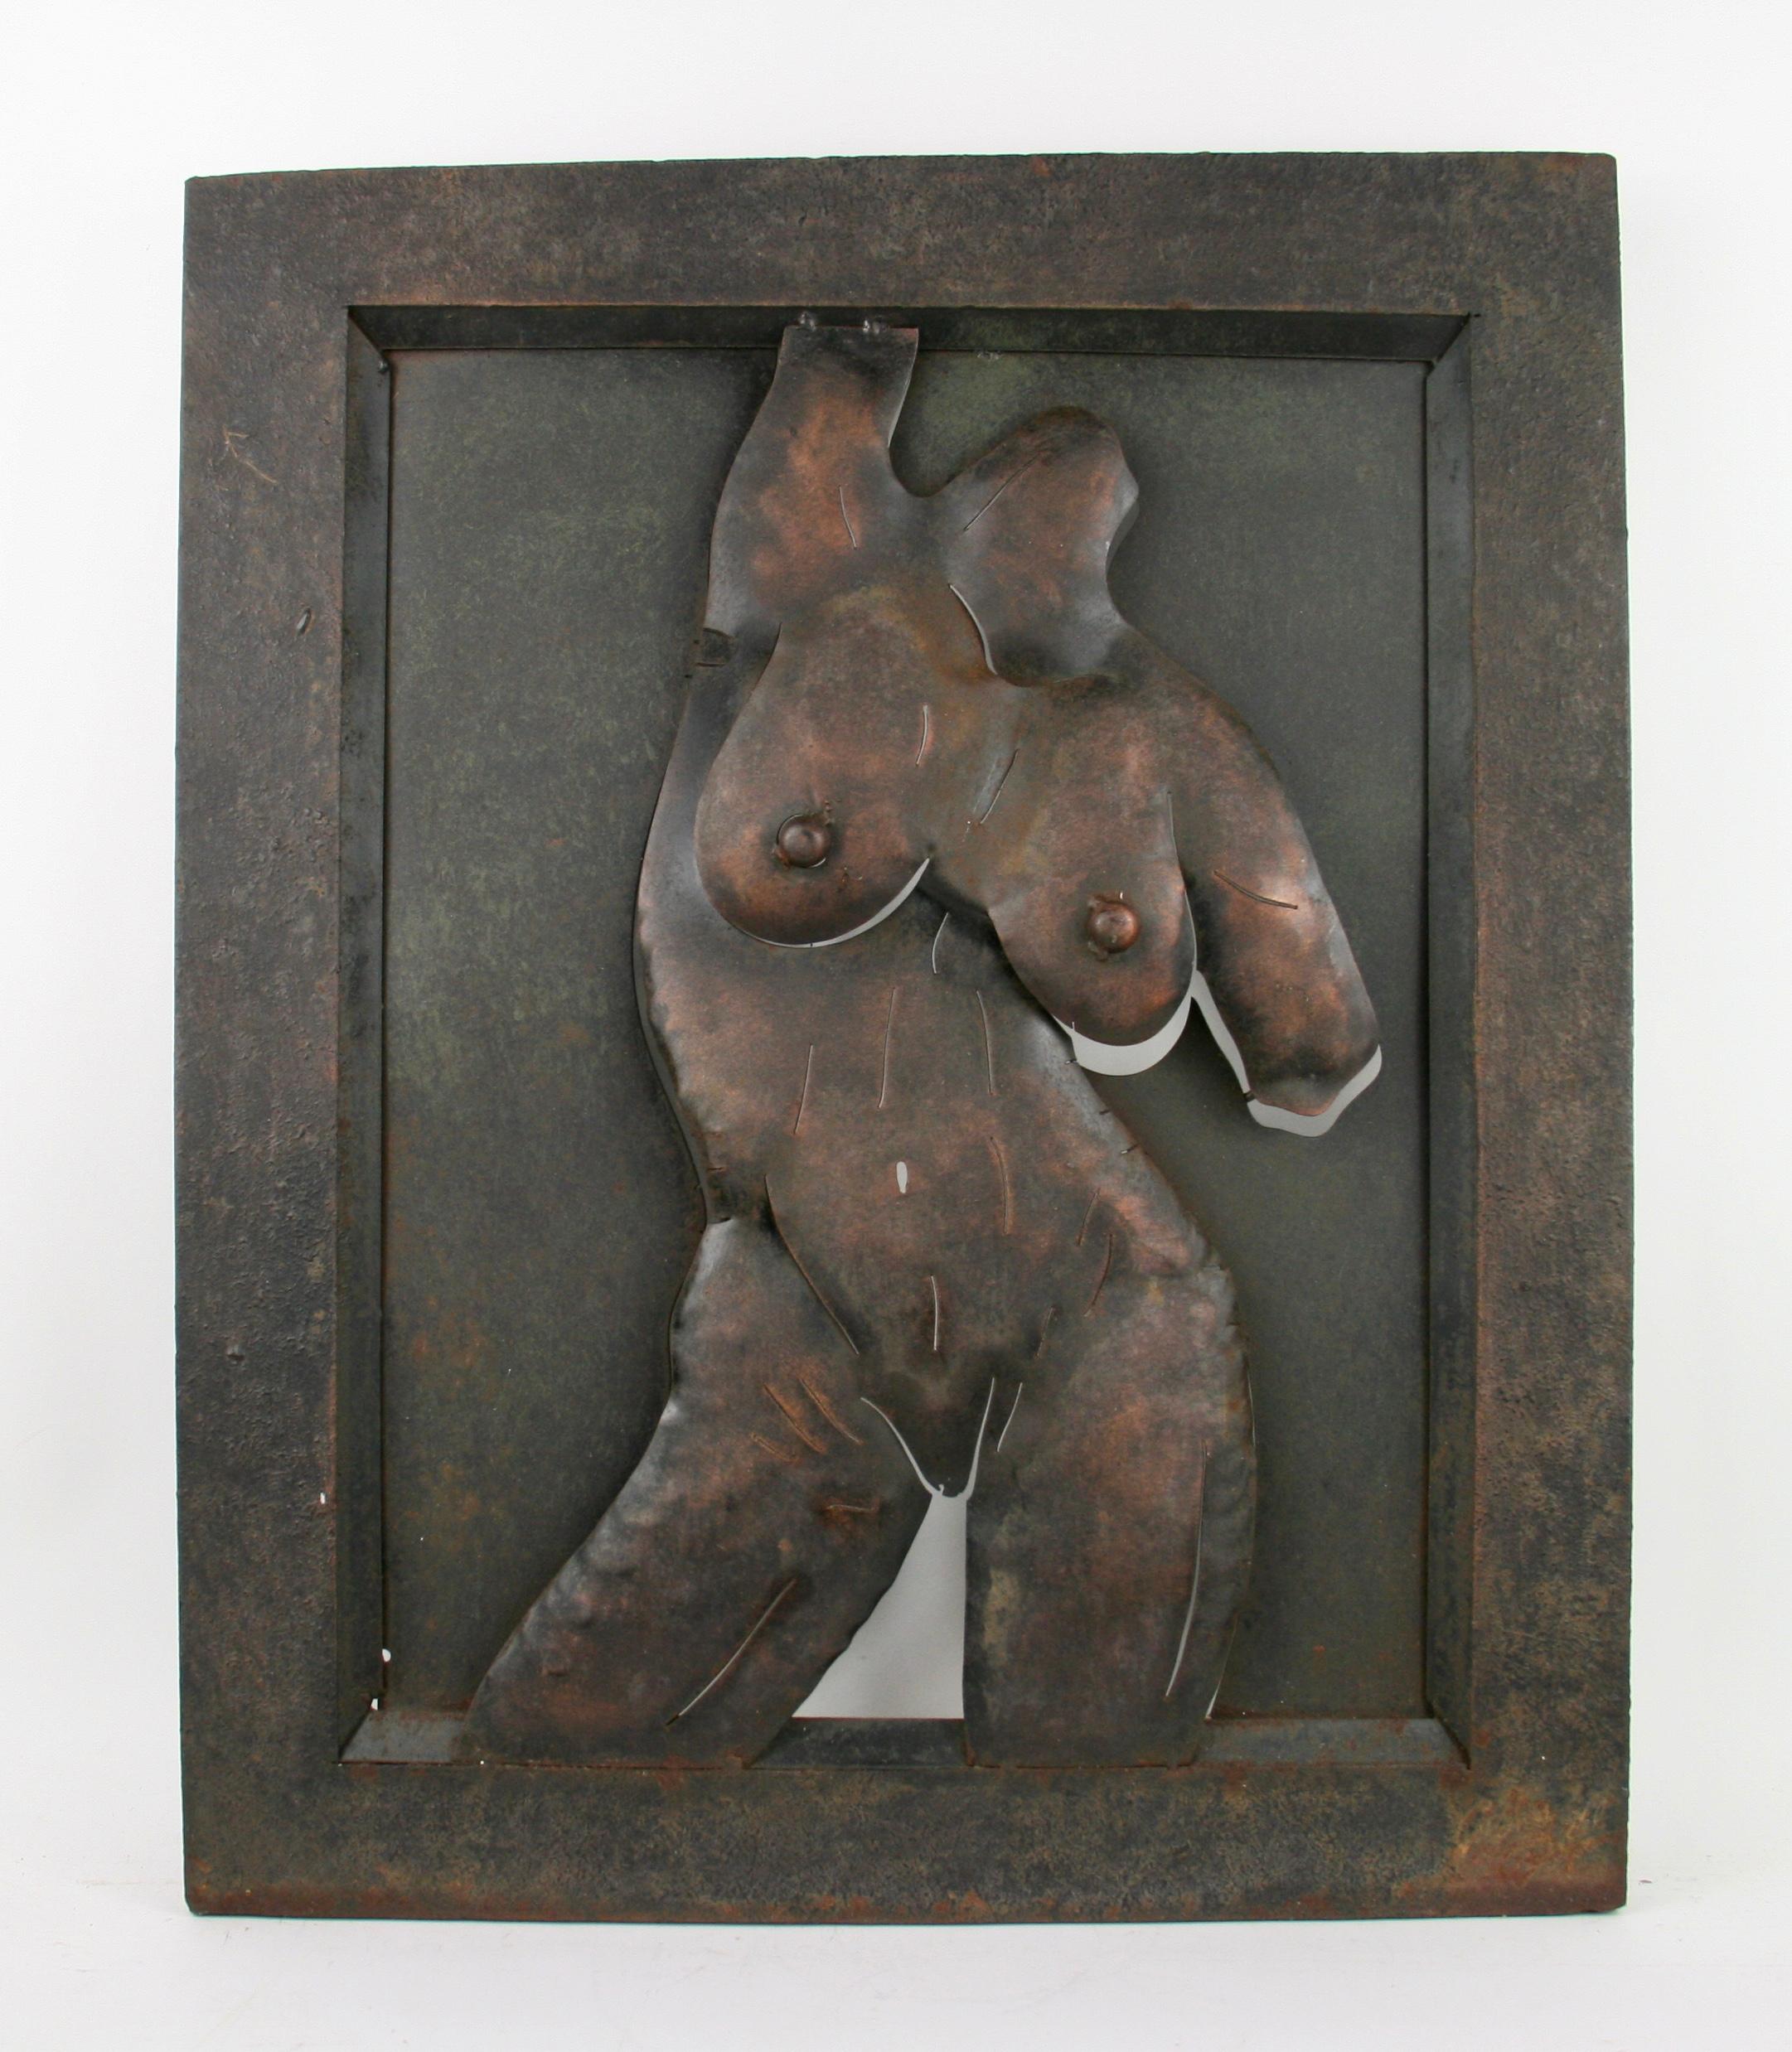 Nude Metal Wall Sculpture - Black Figurative Sculpture by Unknown